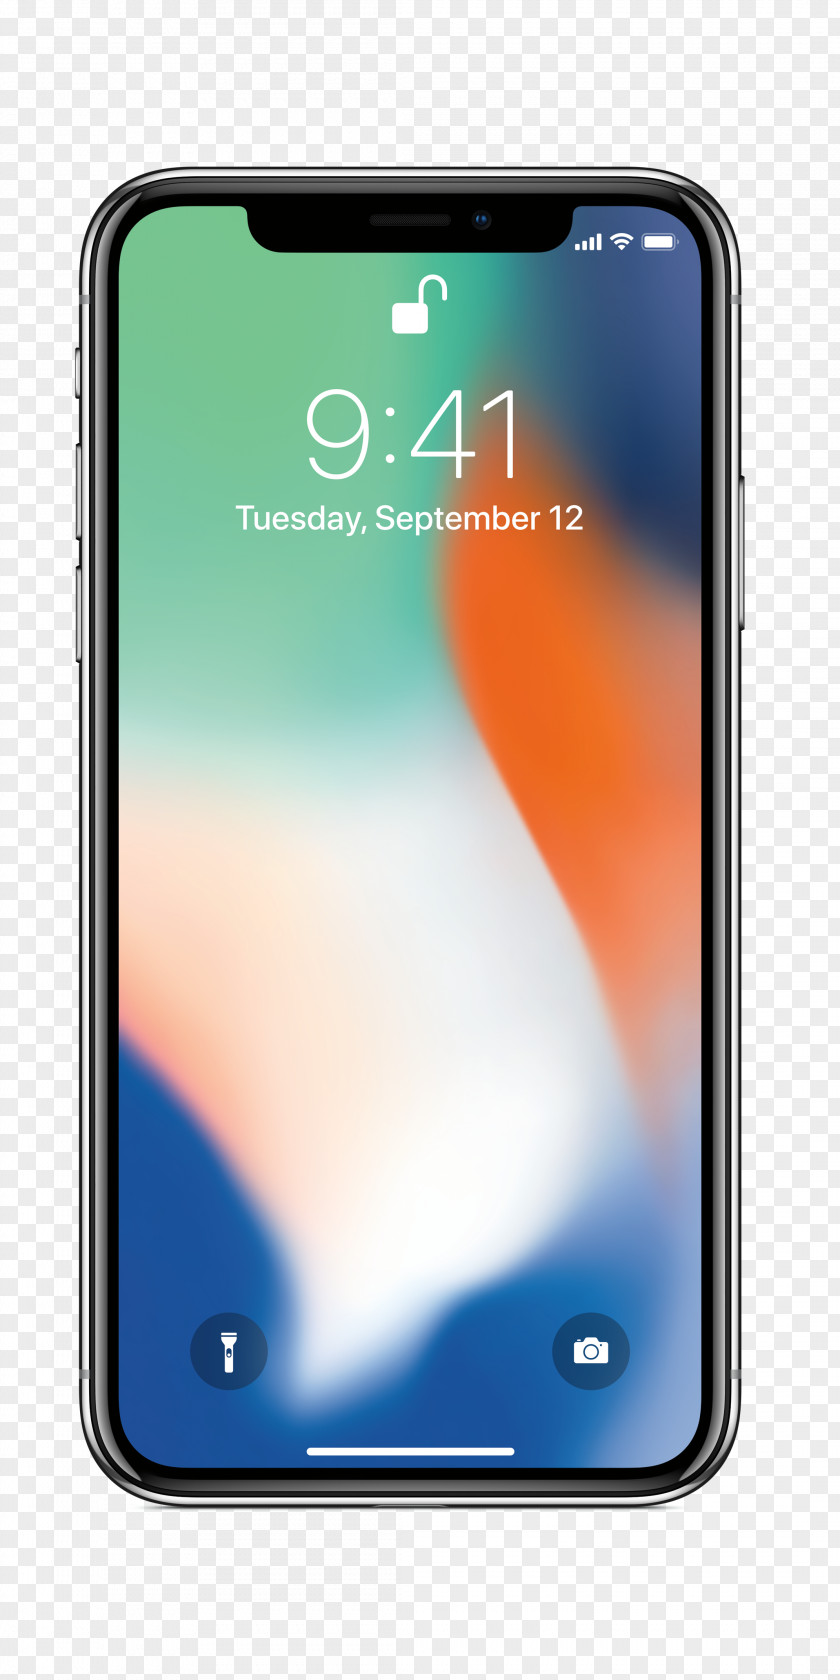 Apple Iphone IPhone X FaceTime 4G LTE PNG